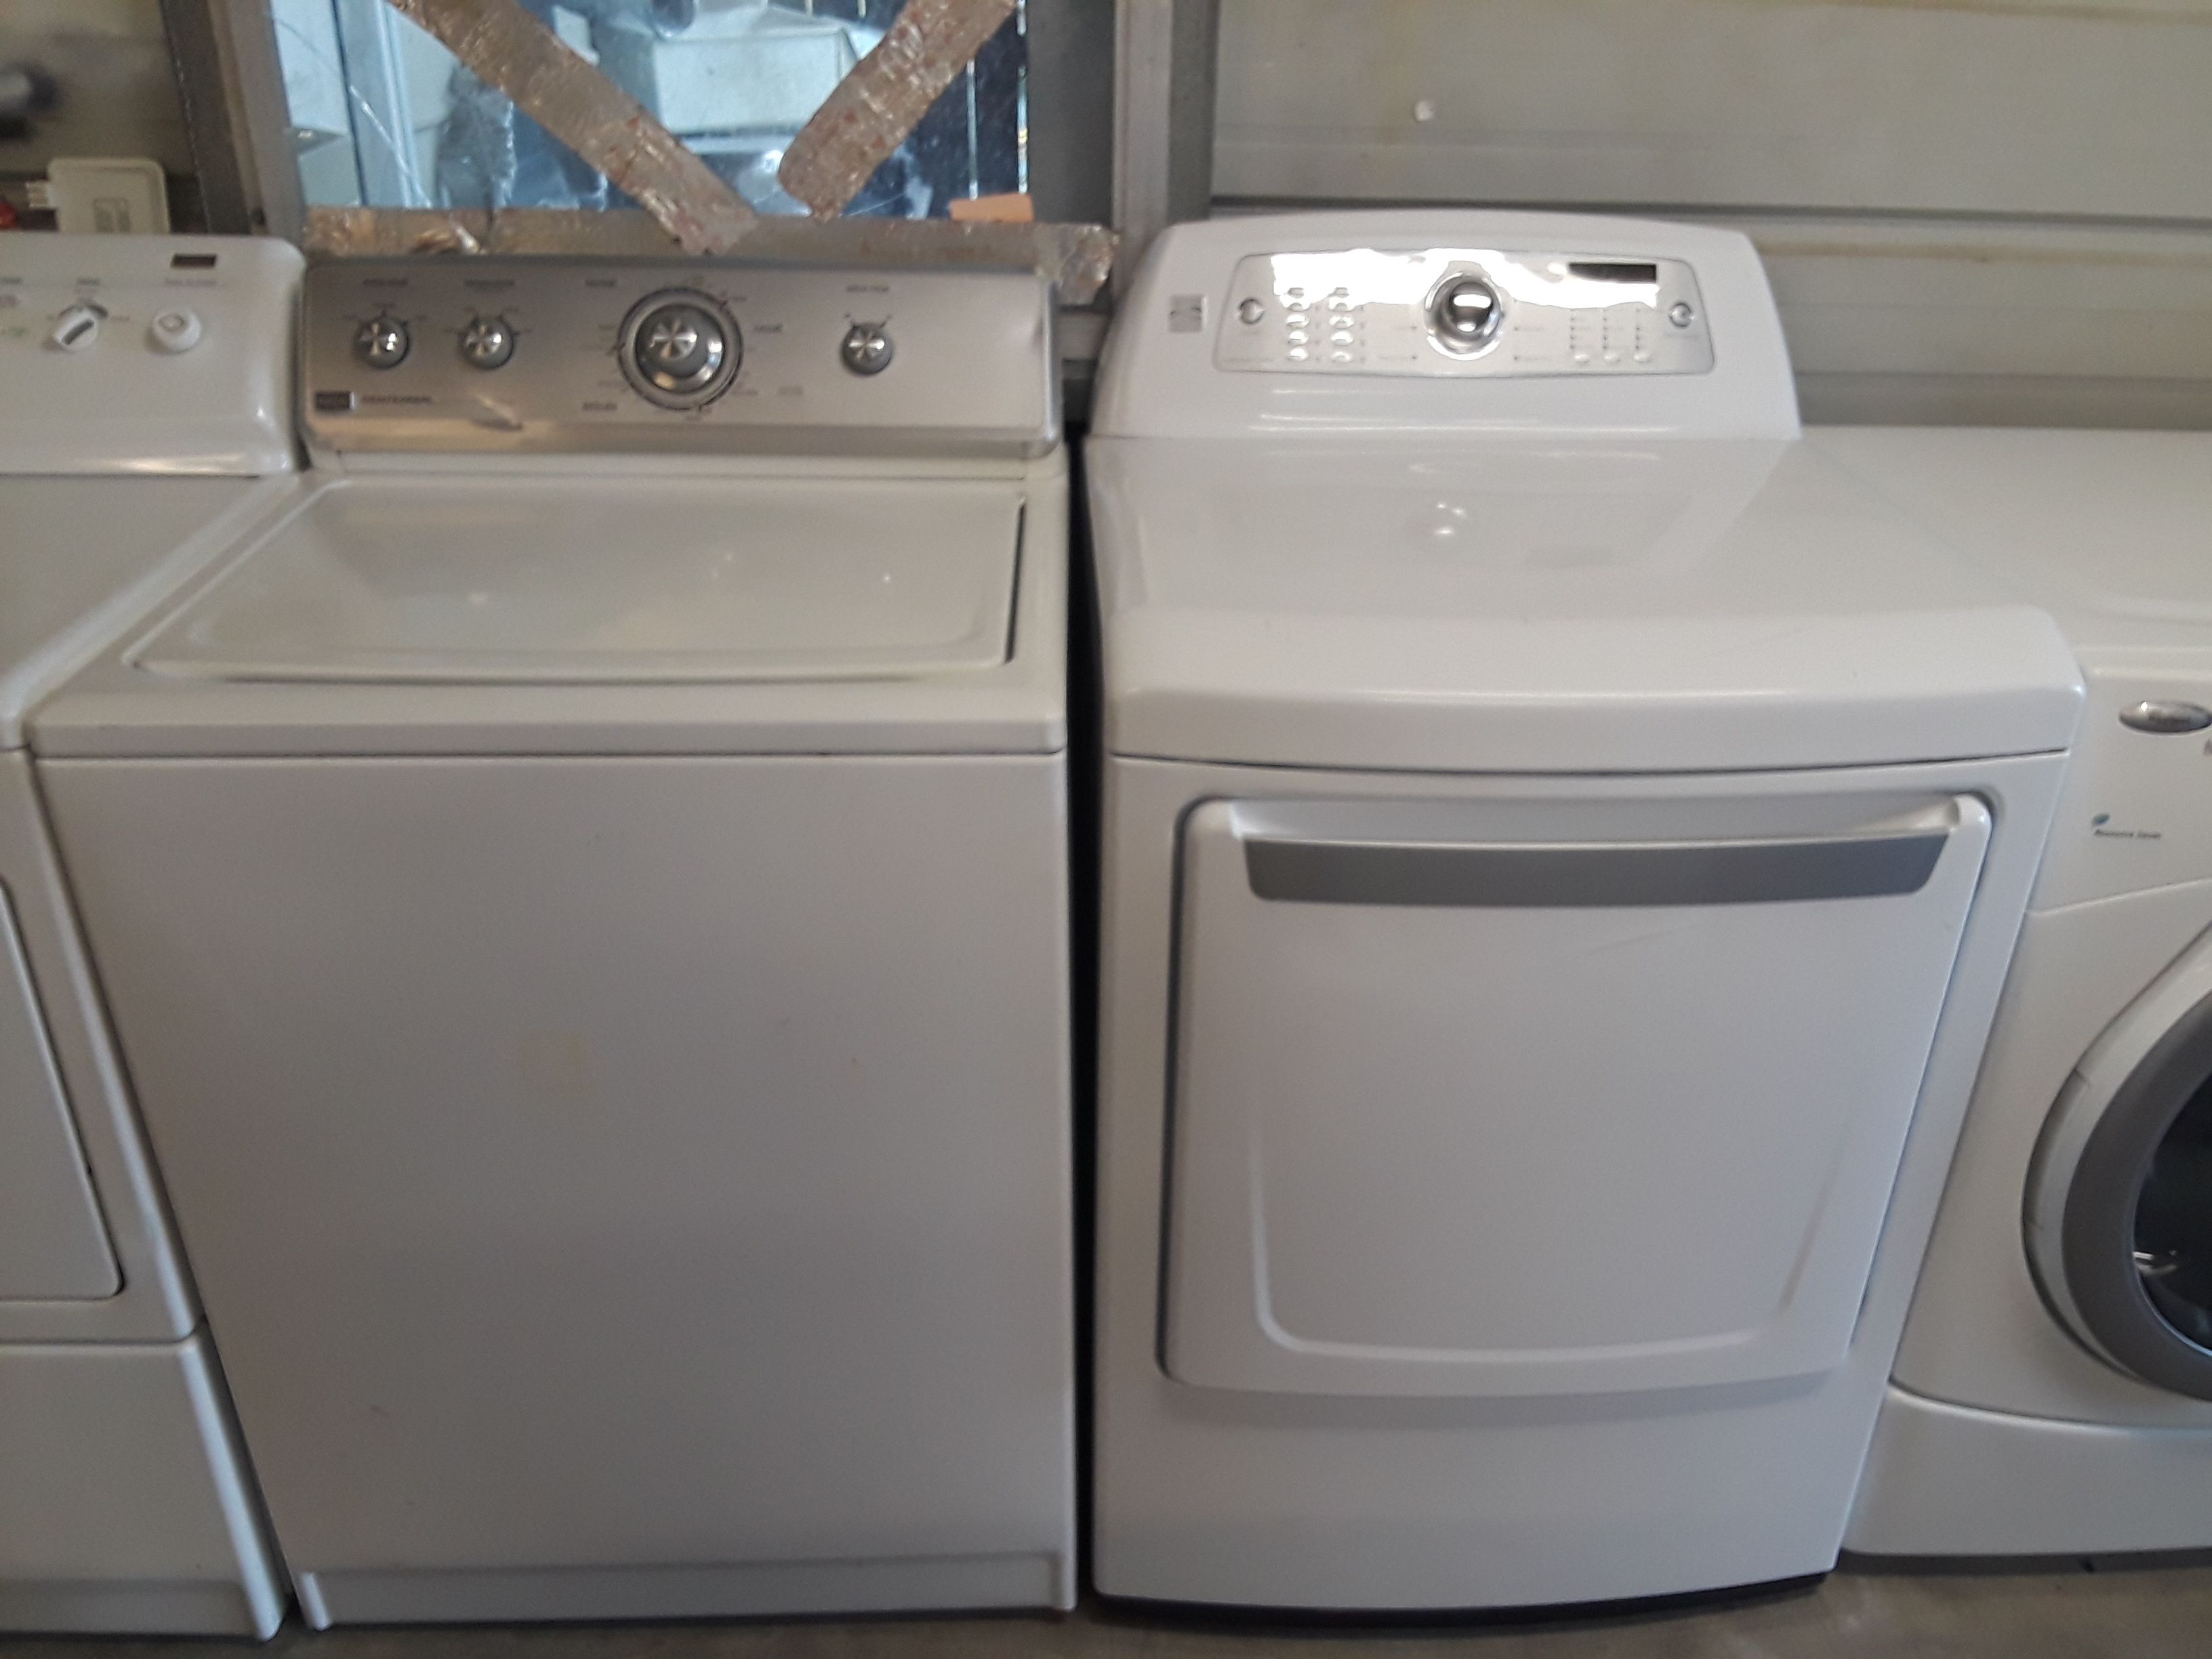 Maytag washer / Kenmore dryer combo